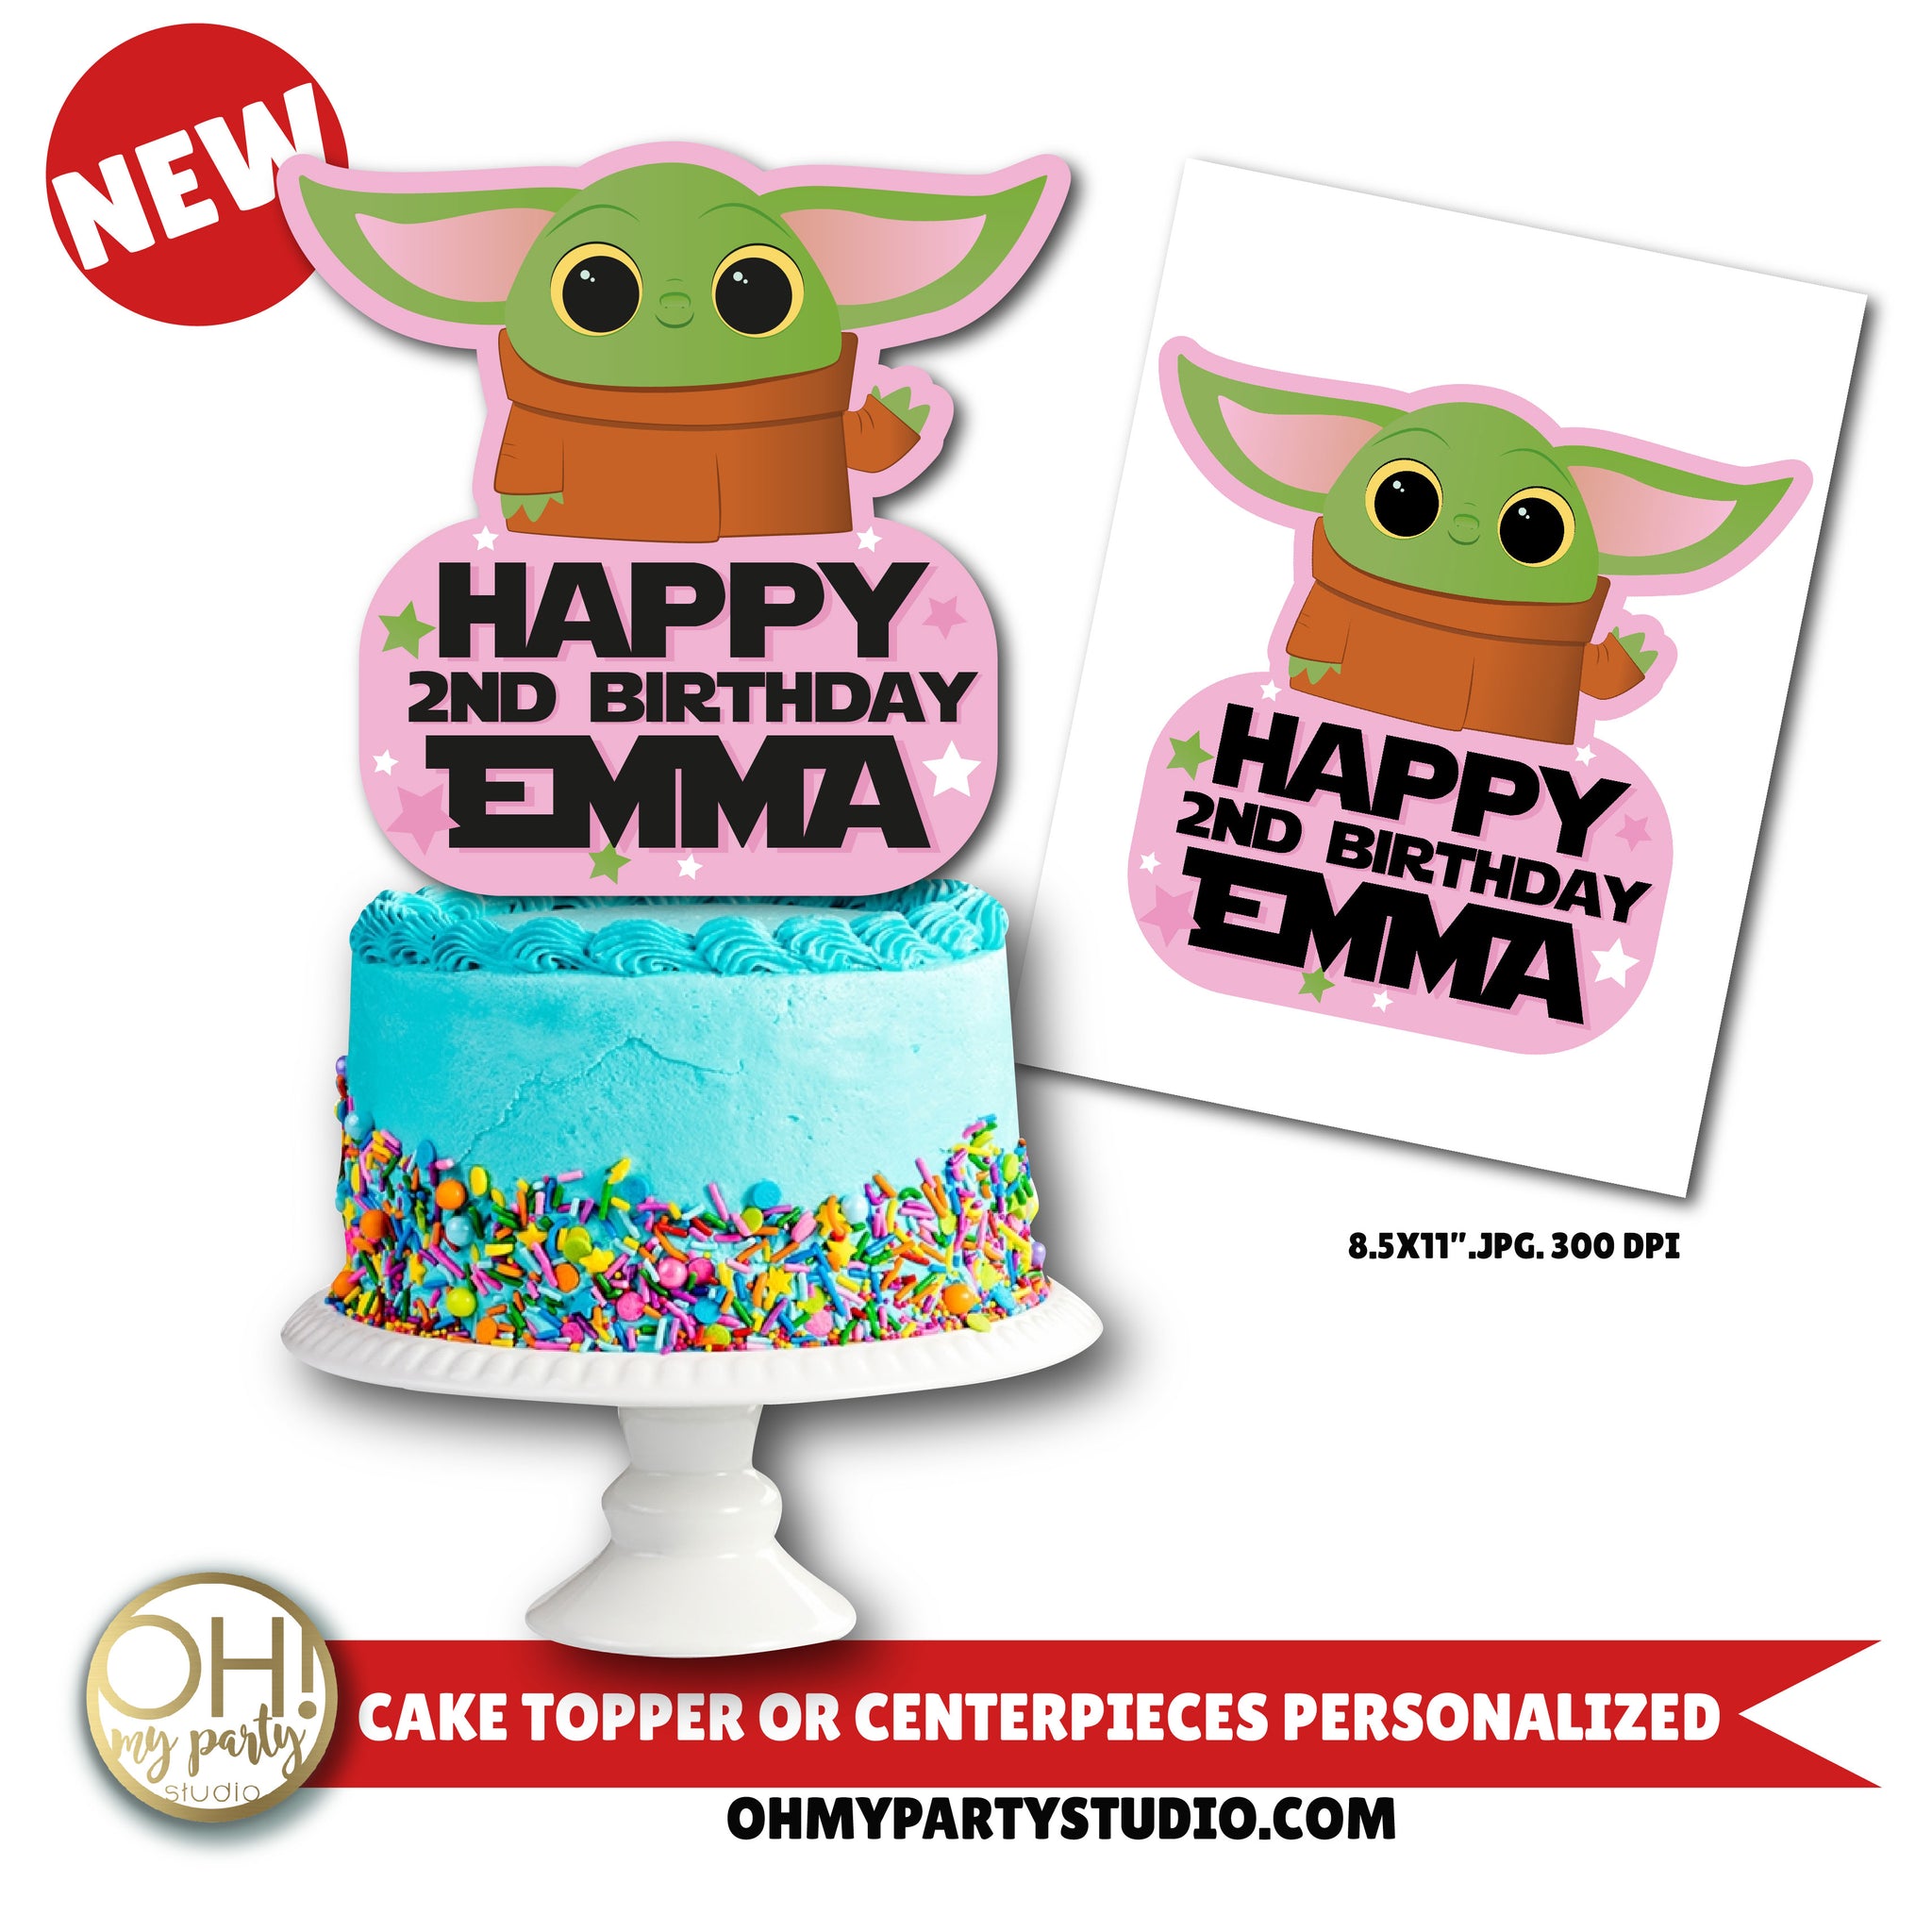 Baby Yoda Cake Baby Yoda Cake Topper Baby Yoda Birthday Party Baby Oh My Party Studio